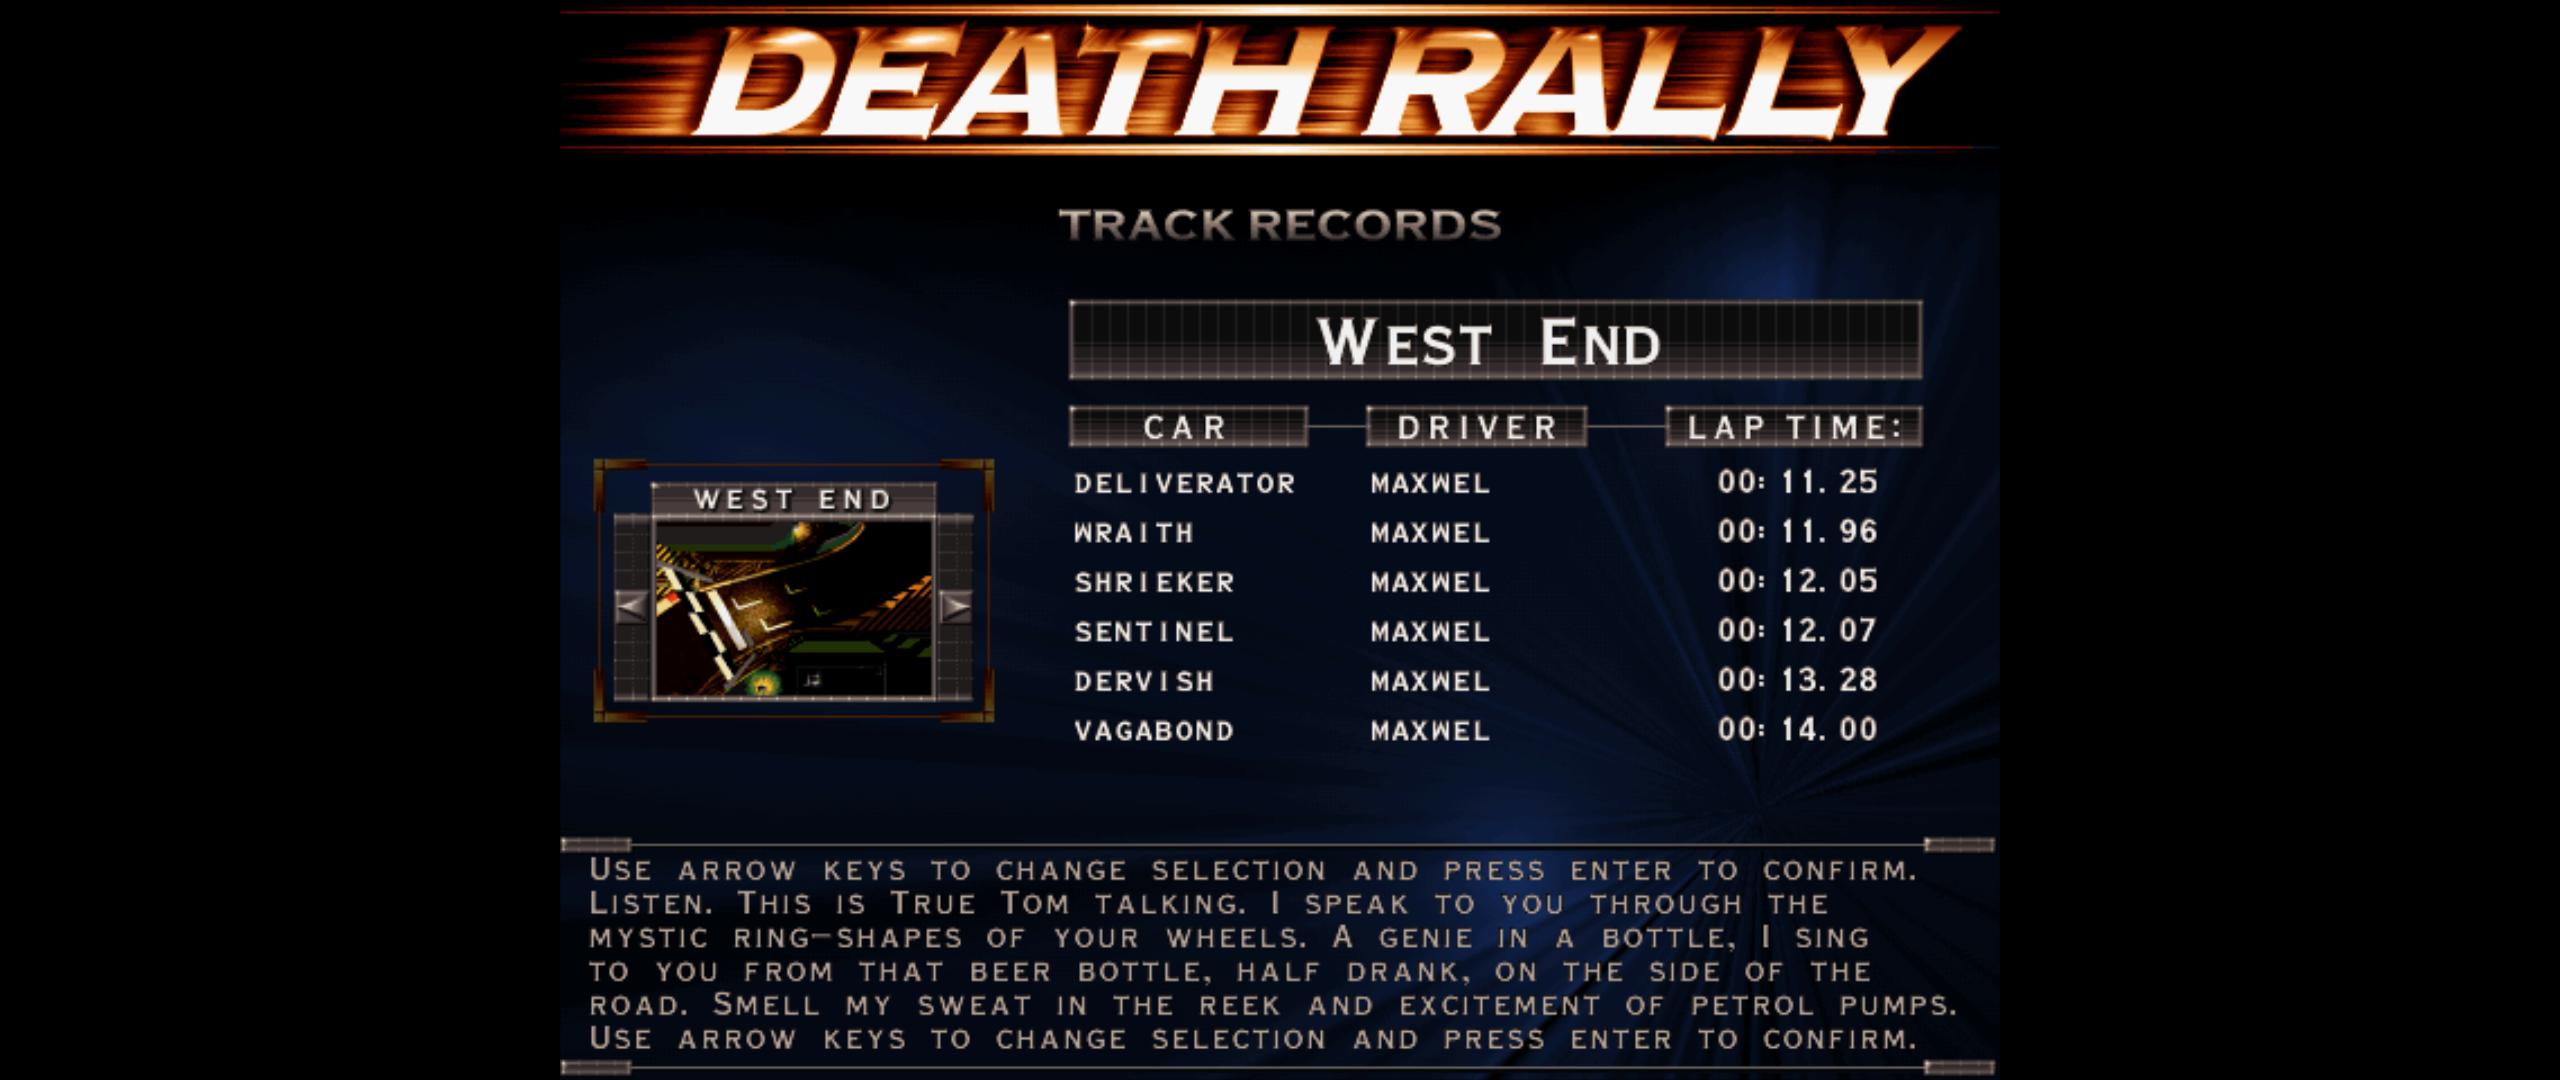 Maxwel: Death Rally [West End, Deliverator Car] (PC) 0:00:11.25 points on 2016-03-04 04:40:08